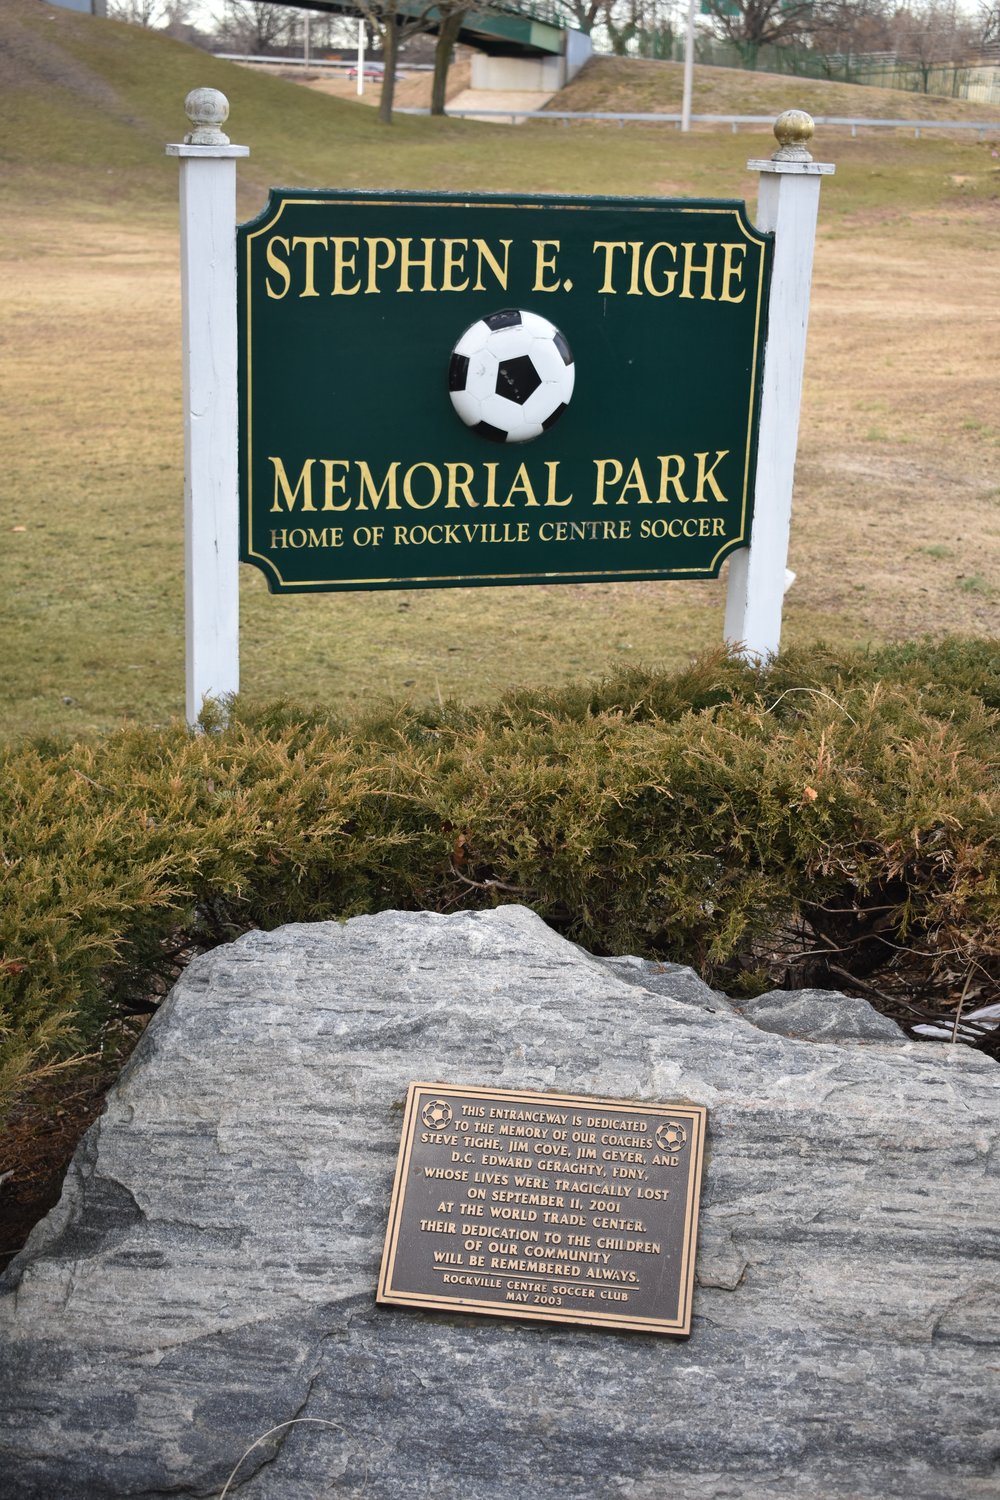 The field was renamed in 2003 after the former Rockville Centre Soccer Club player, board member and coach.